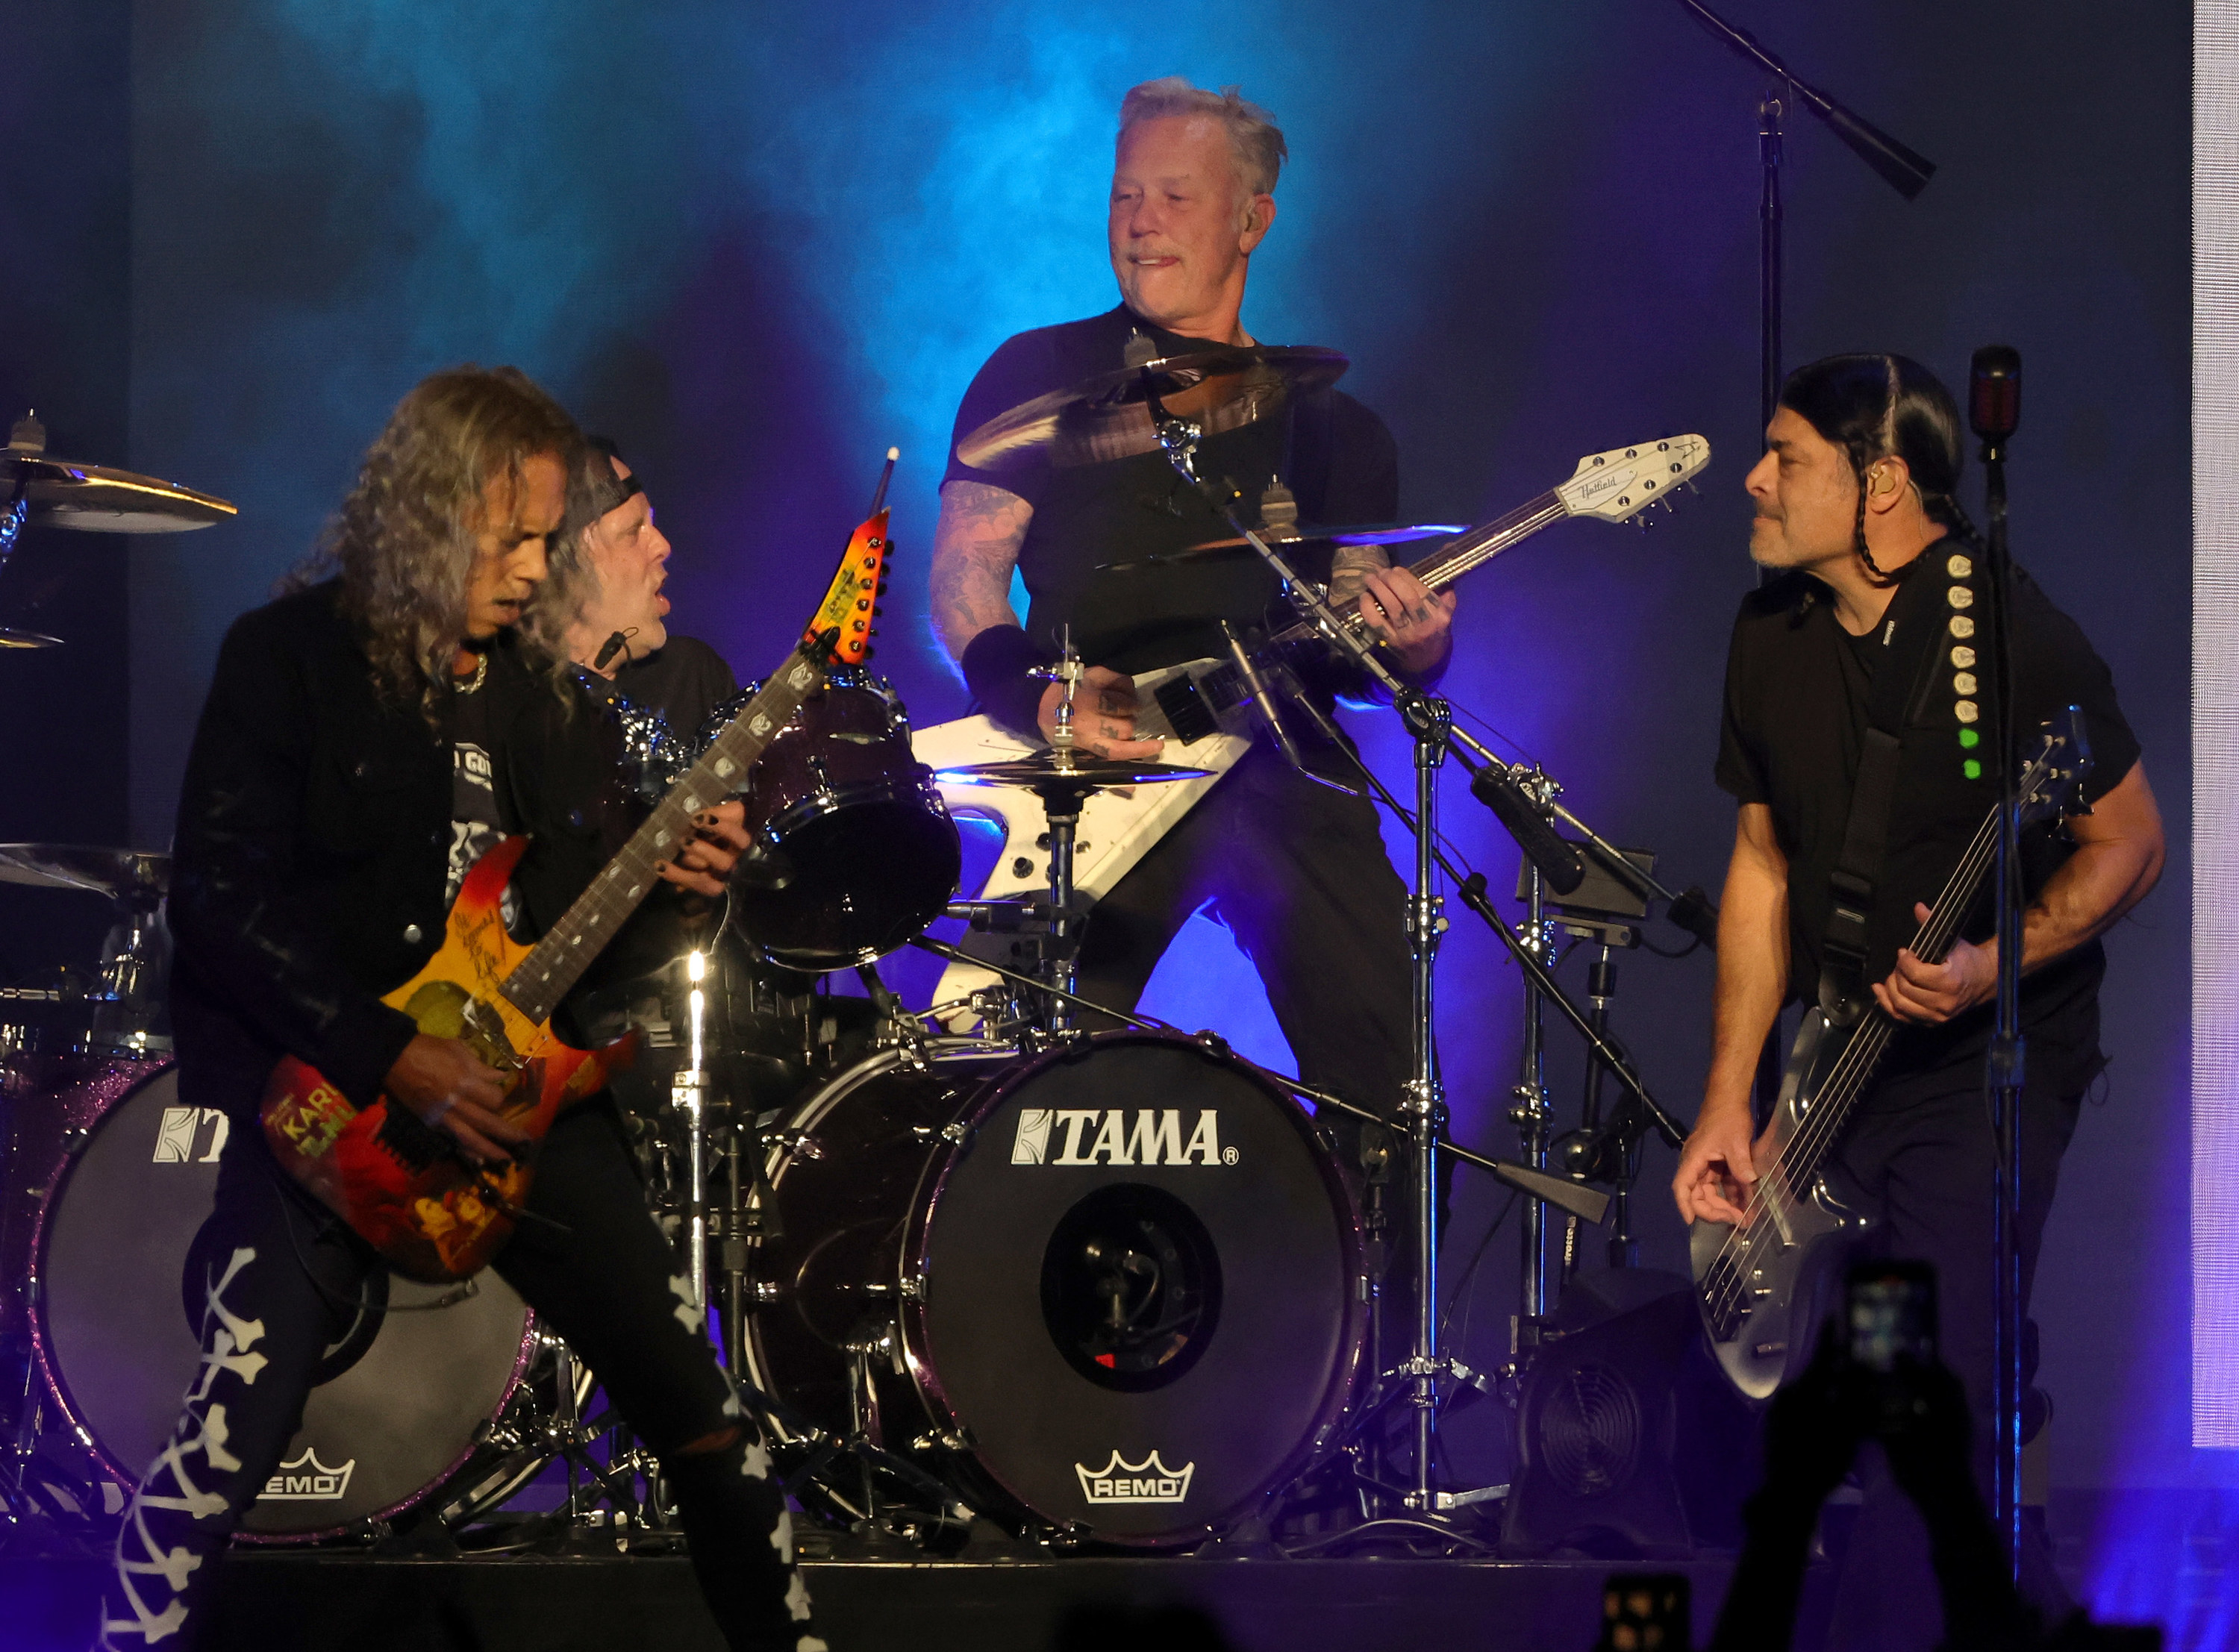 metallica performing on stage